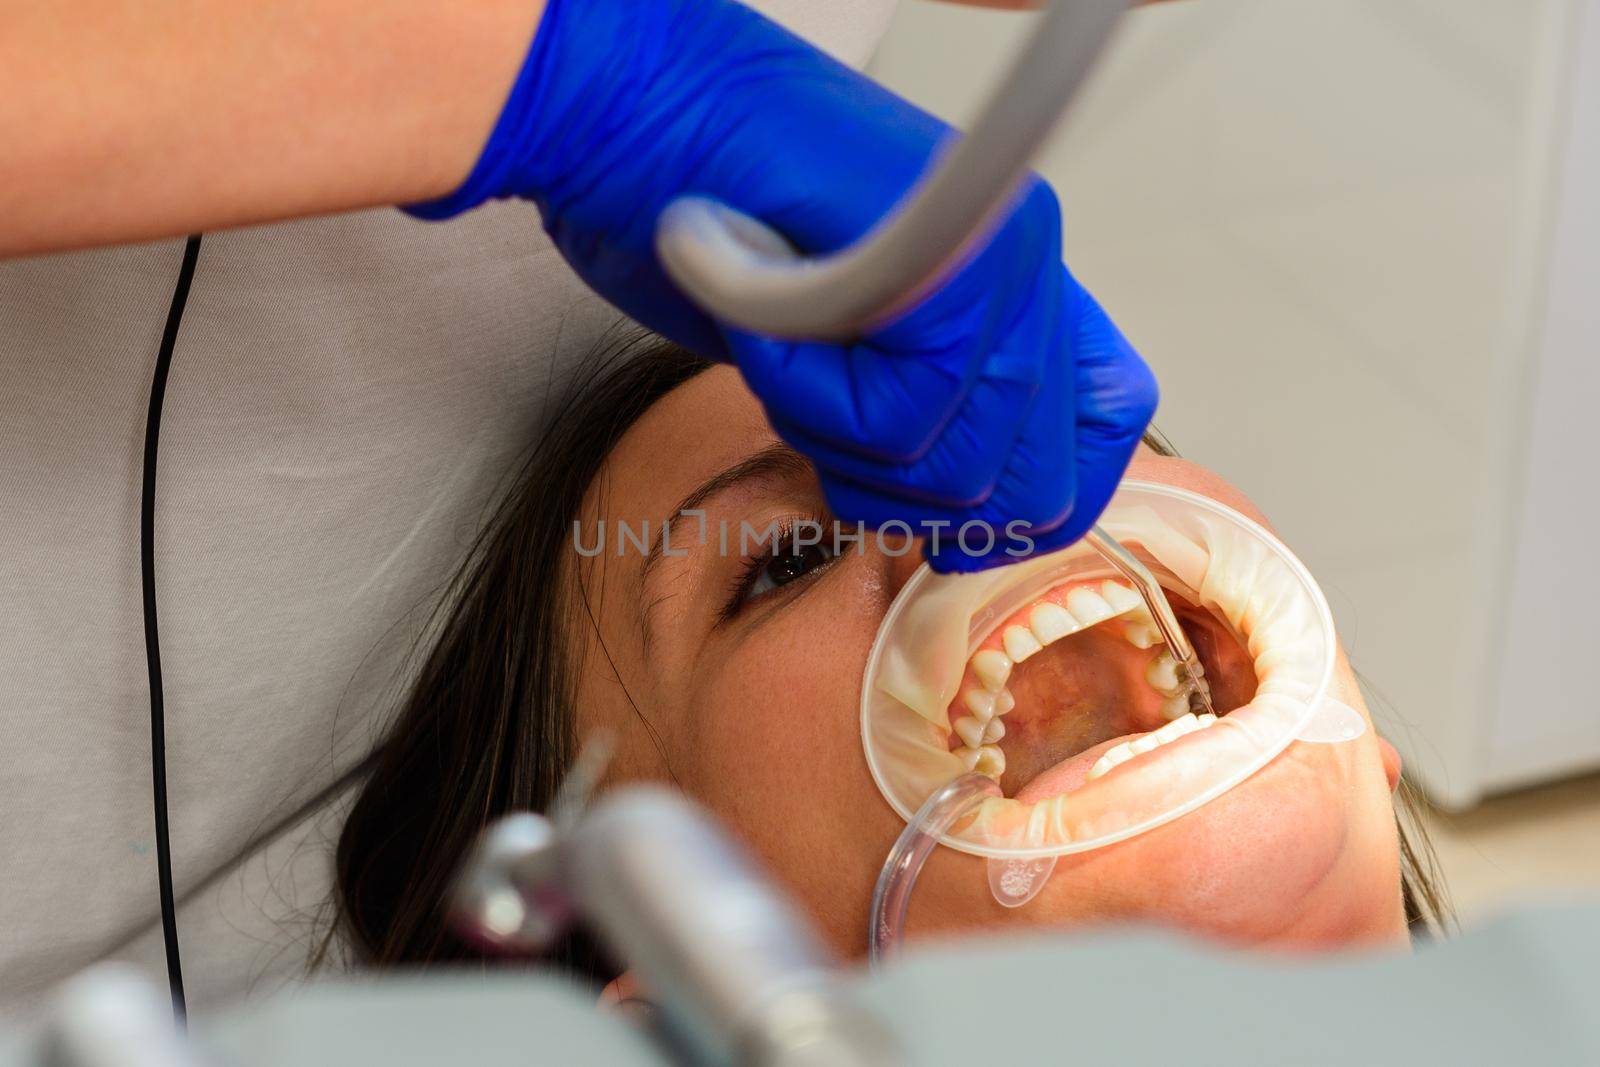 After cleaning the teeth from tartar, the dentist rinses them with water, using only sterile instruments.2020